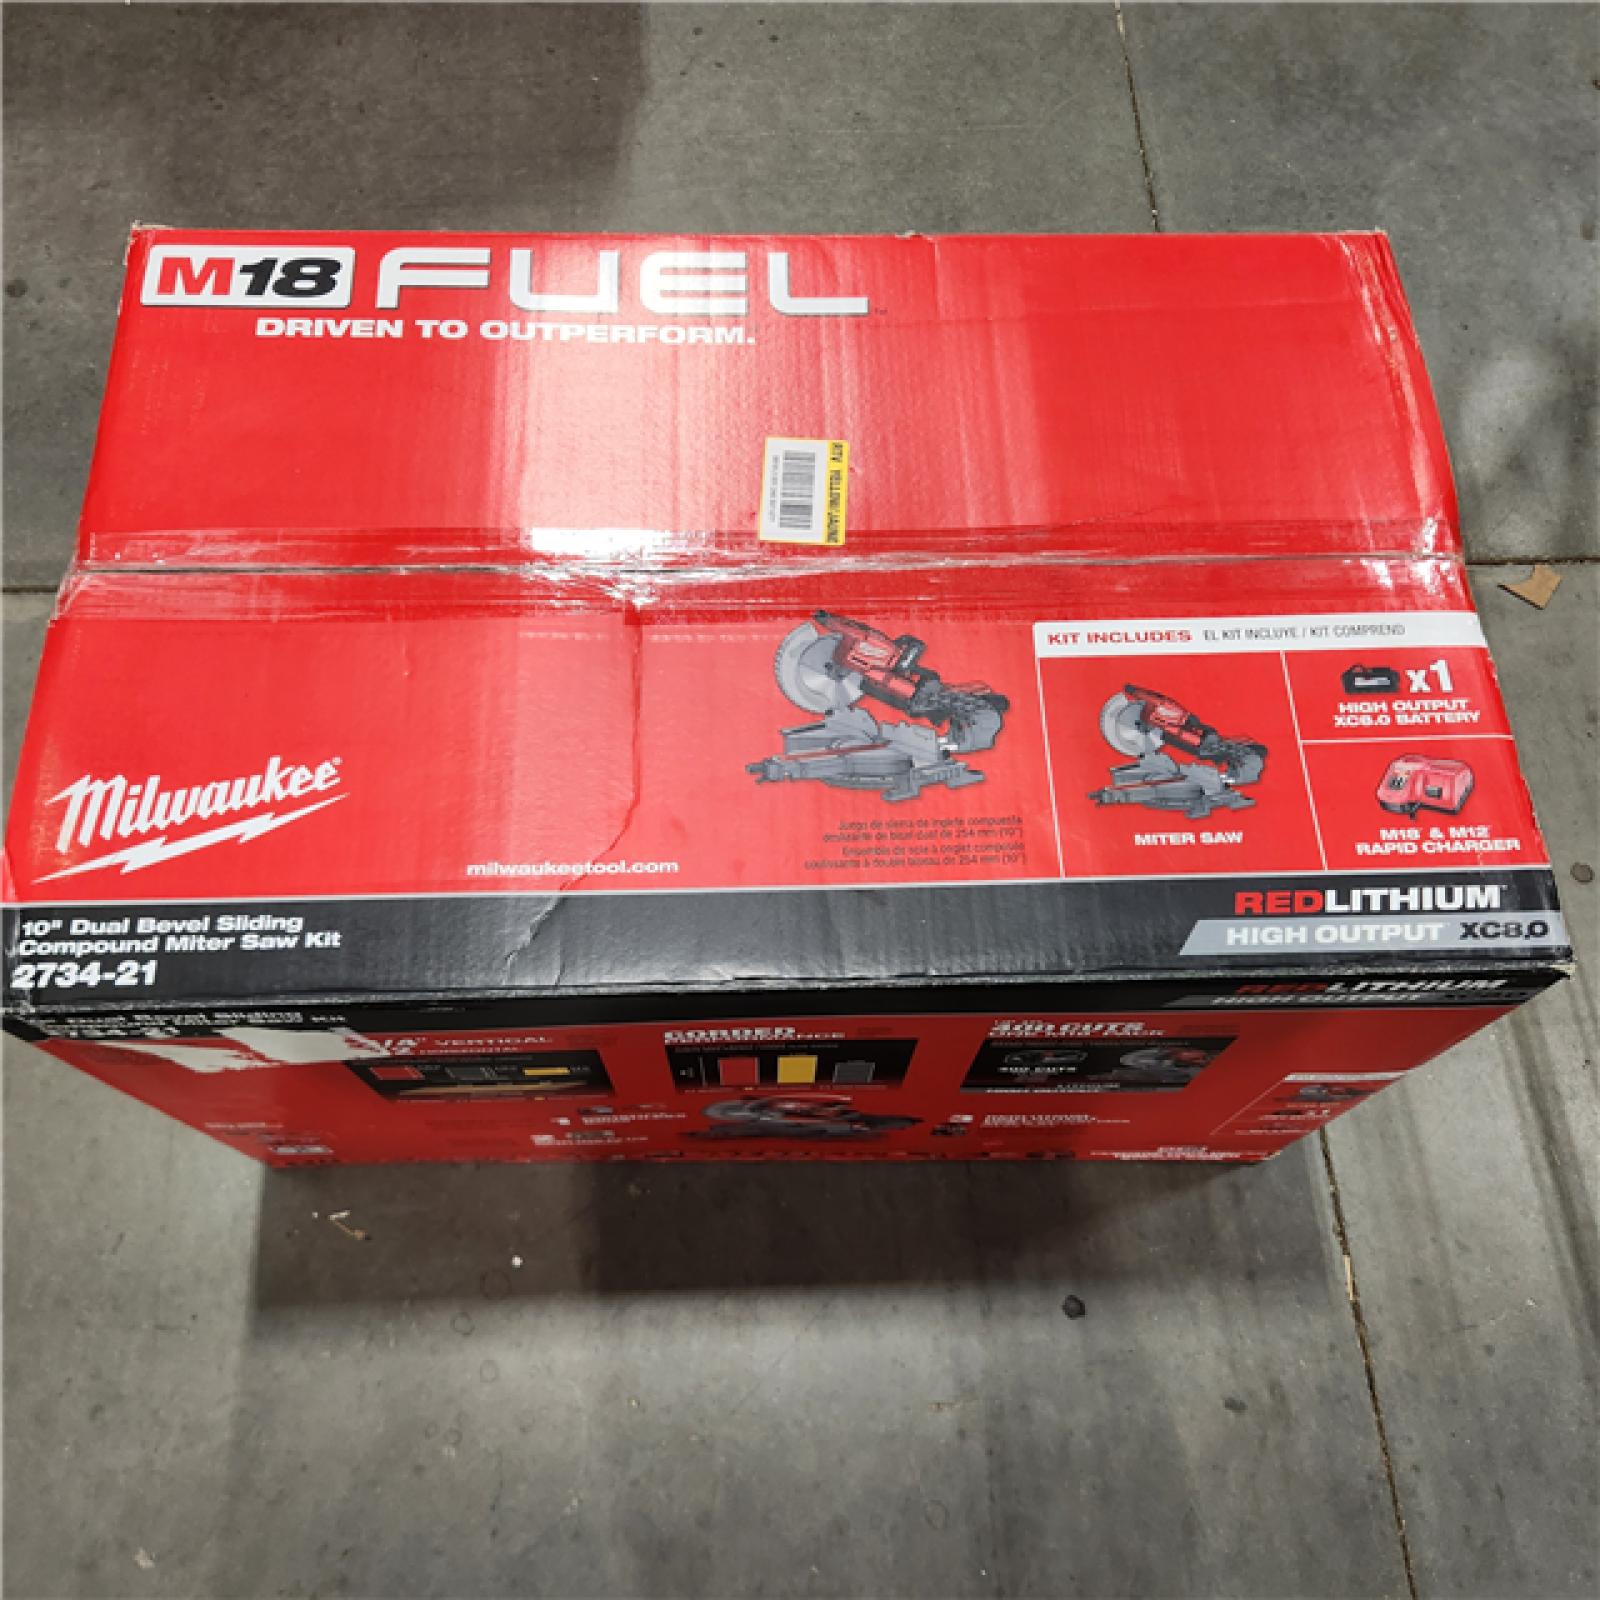 NEW! Milwaukee M18 FUEL 18V 10 in. Lithium-Ion Brushless Cordless Dual Bevel Sliding Compound Miter Saw Kit